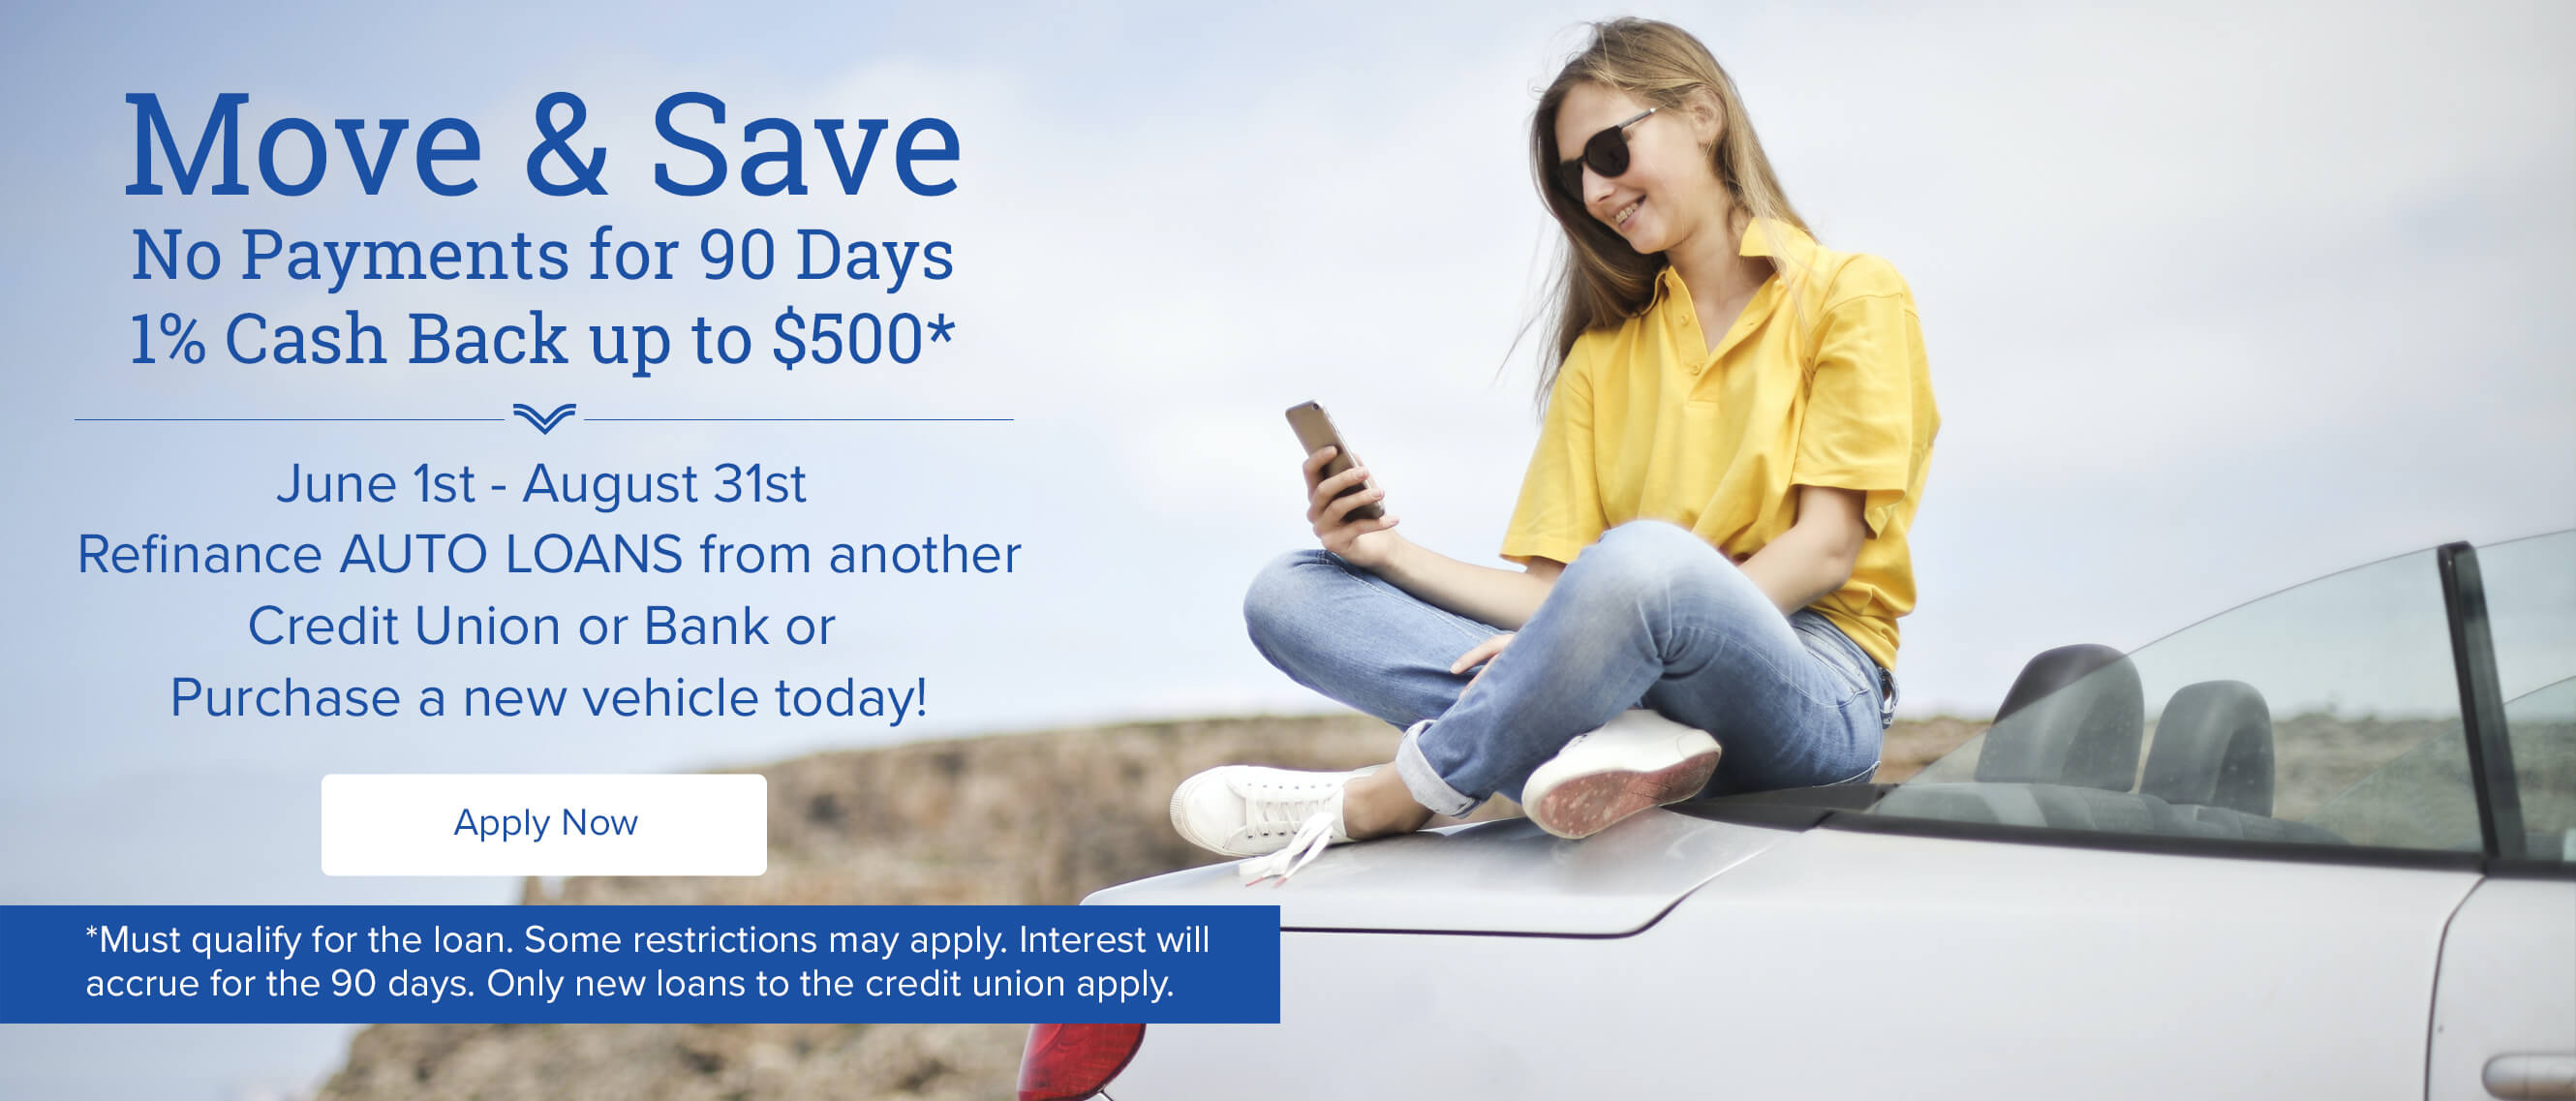 Move & Save No Payments for 90 Days 1% Cash Back up to $500*